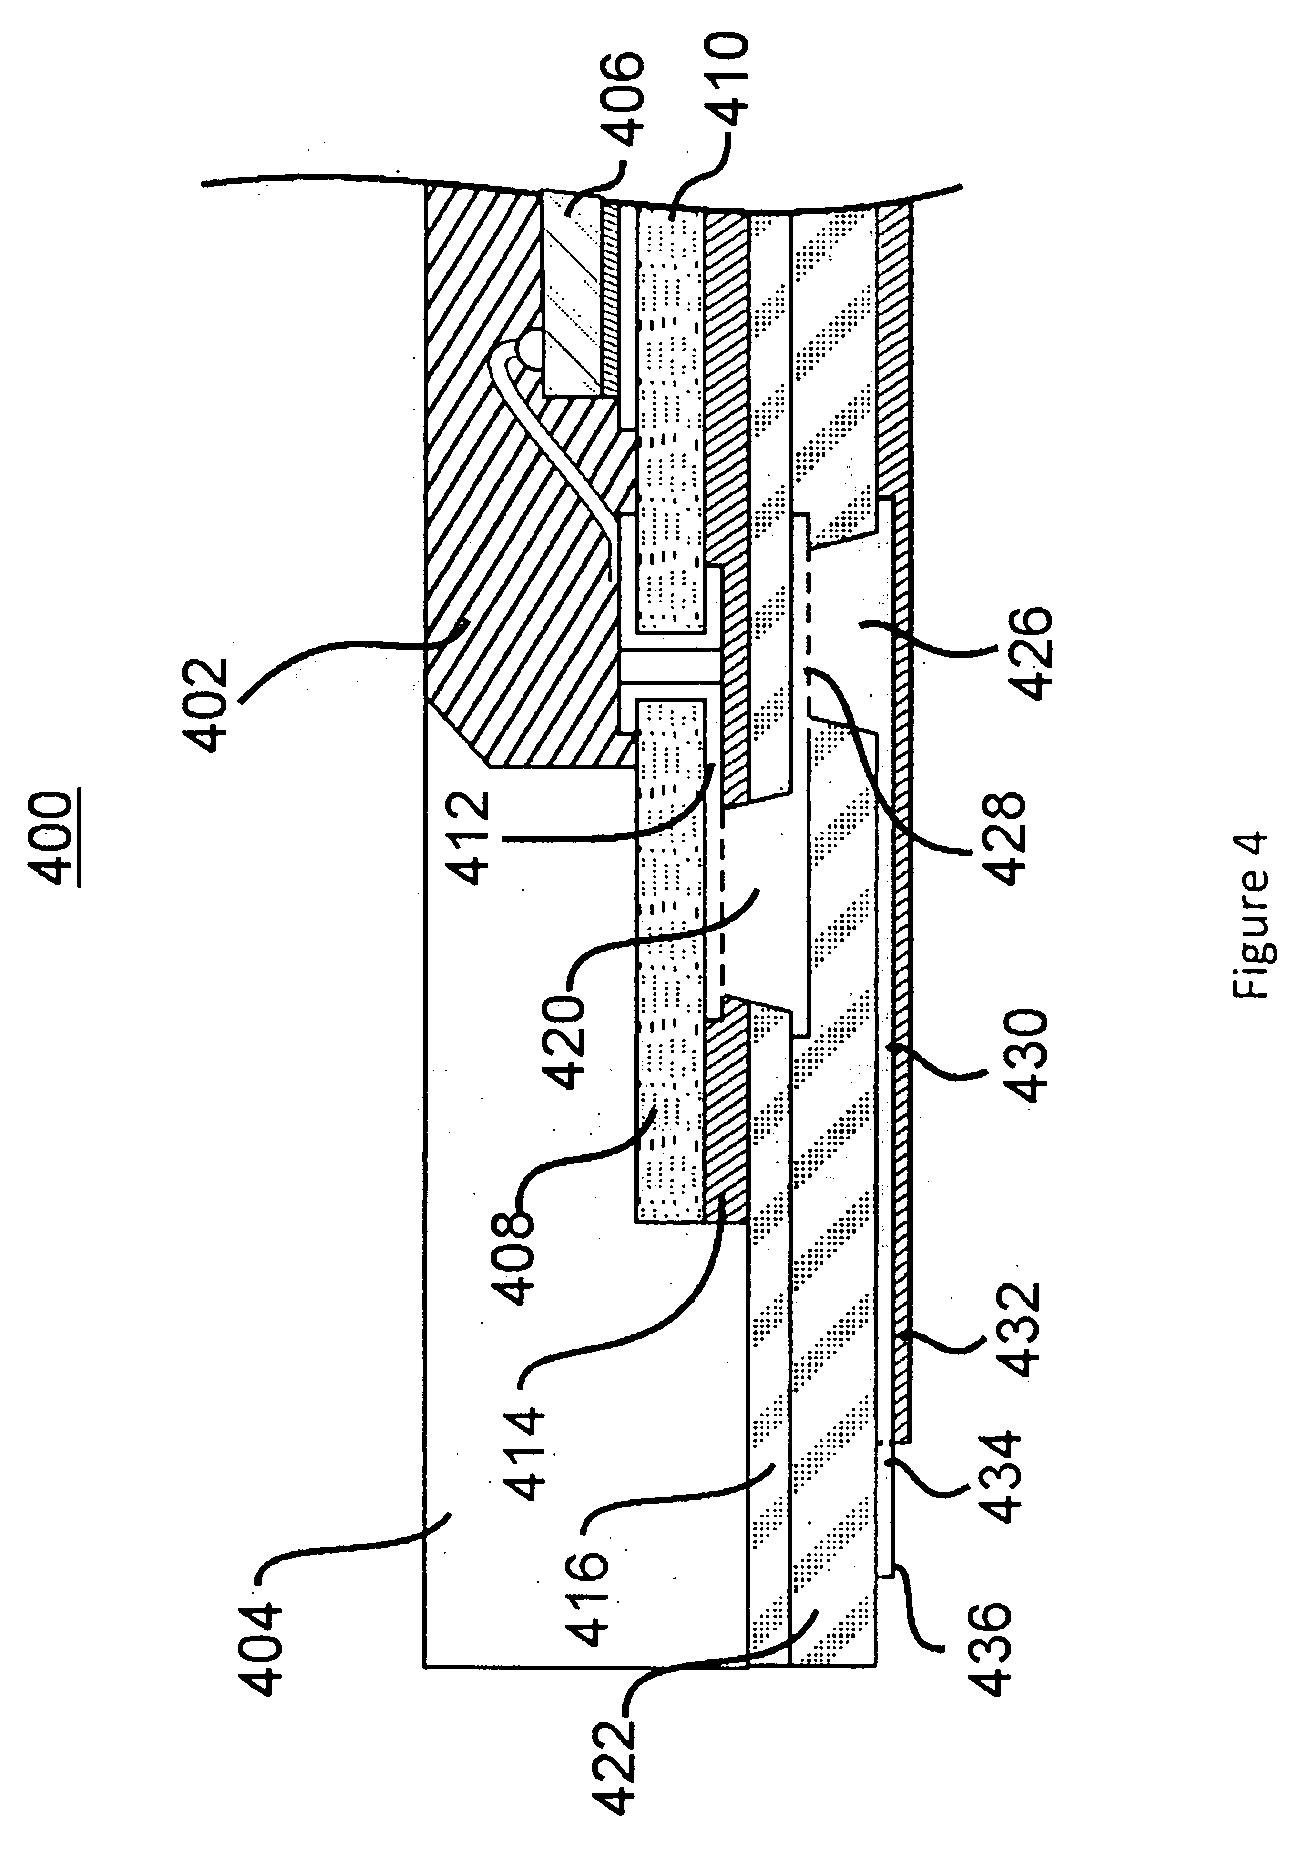 Electronic Assemblies Without Solder and Methods for their Manufacture